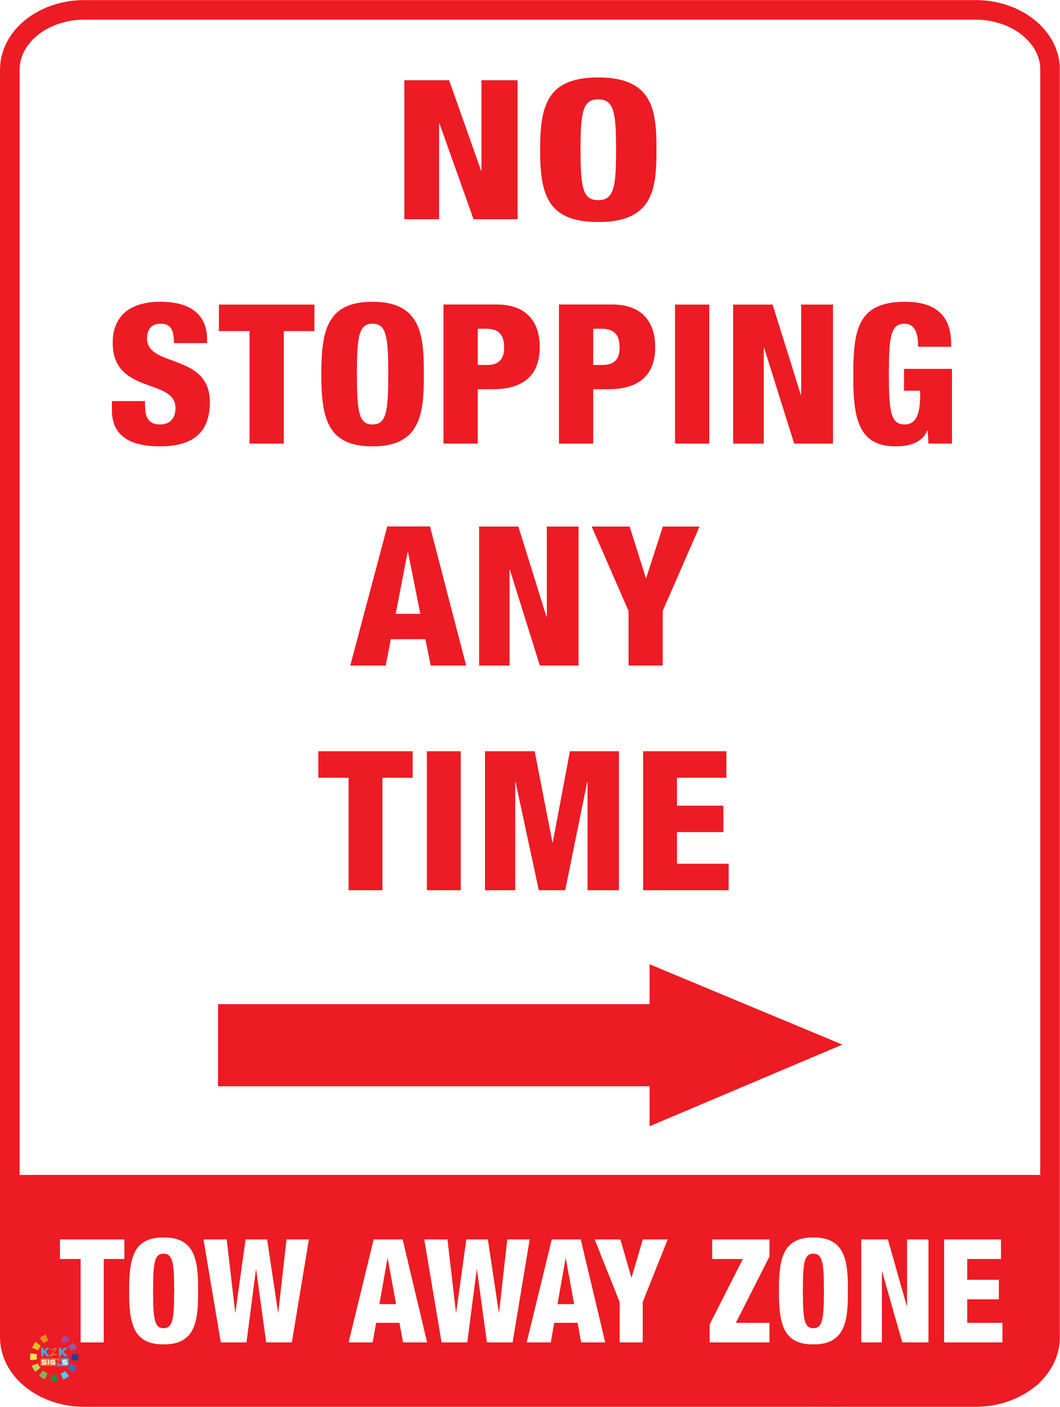 No Stopping Any Time Tow Away Zone (Right Arrow) Sign